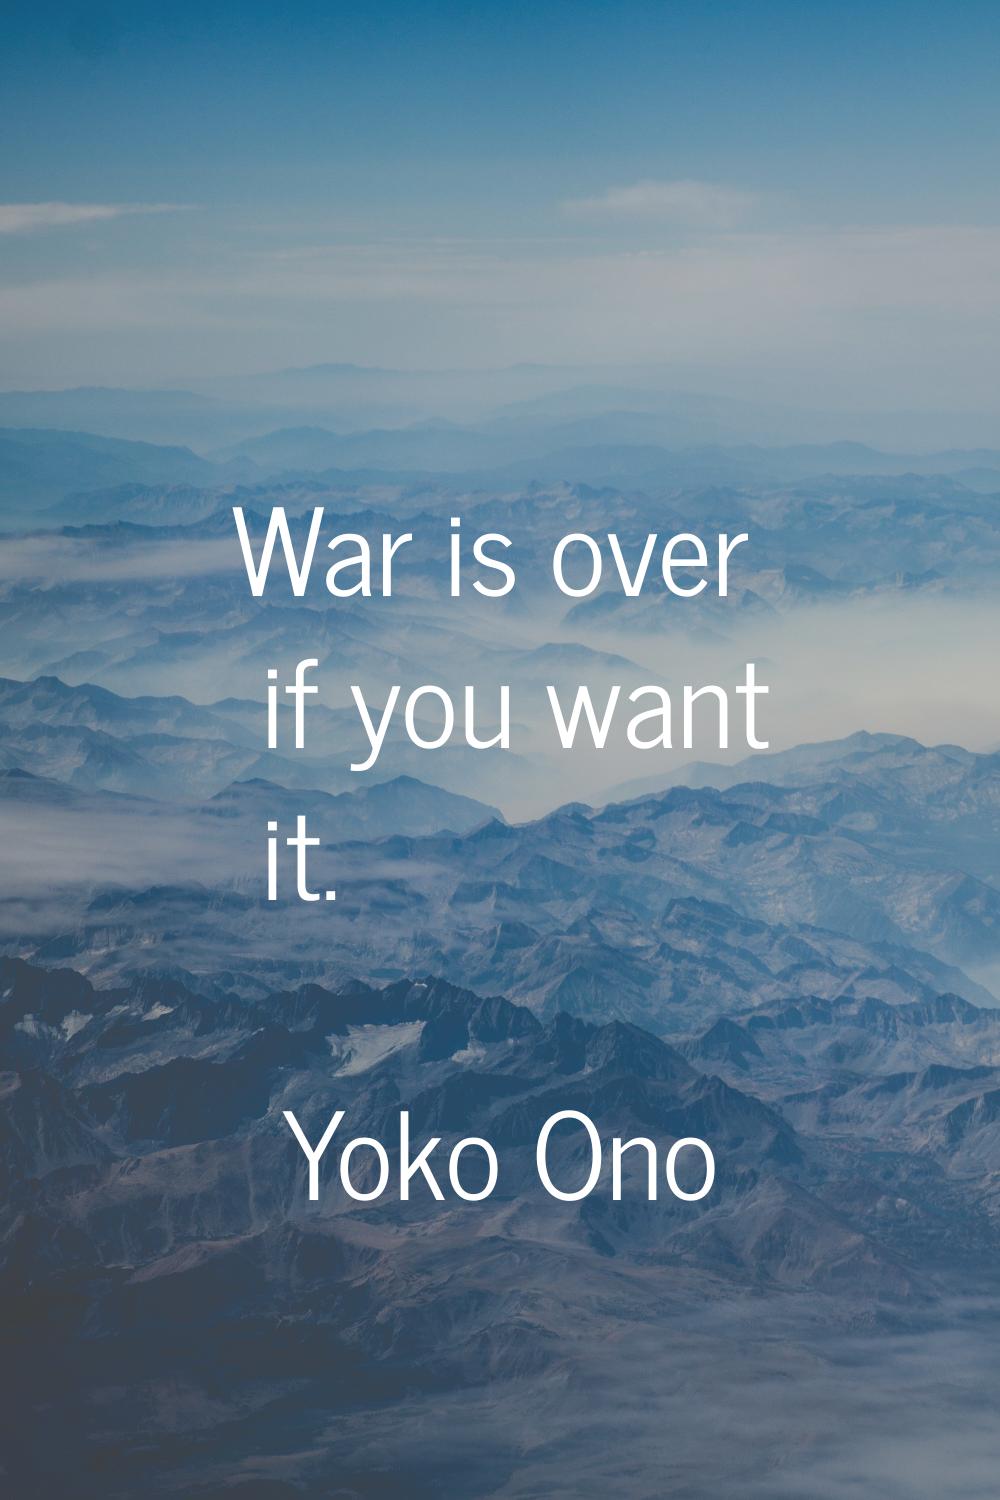 War is over if you want it.